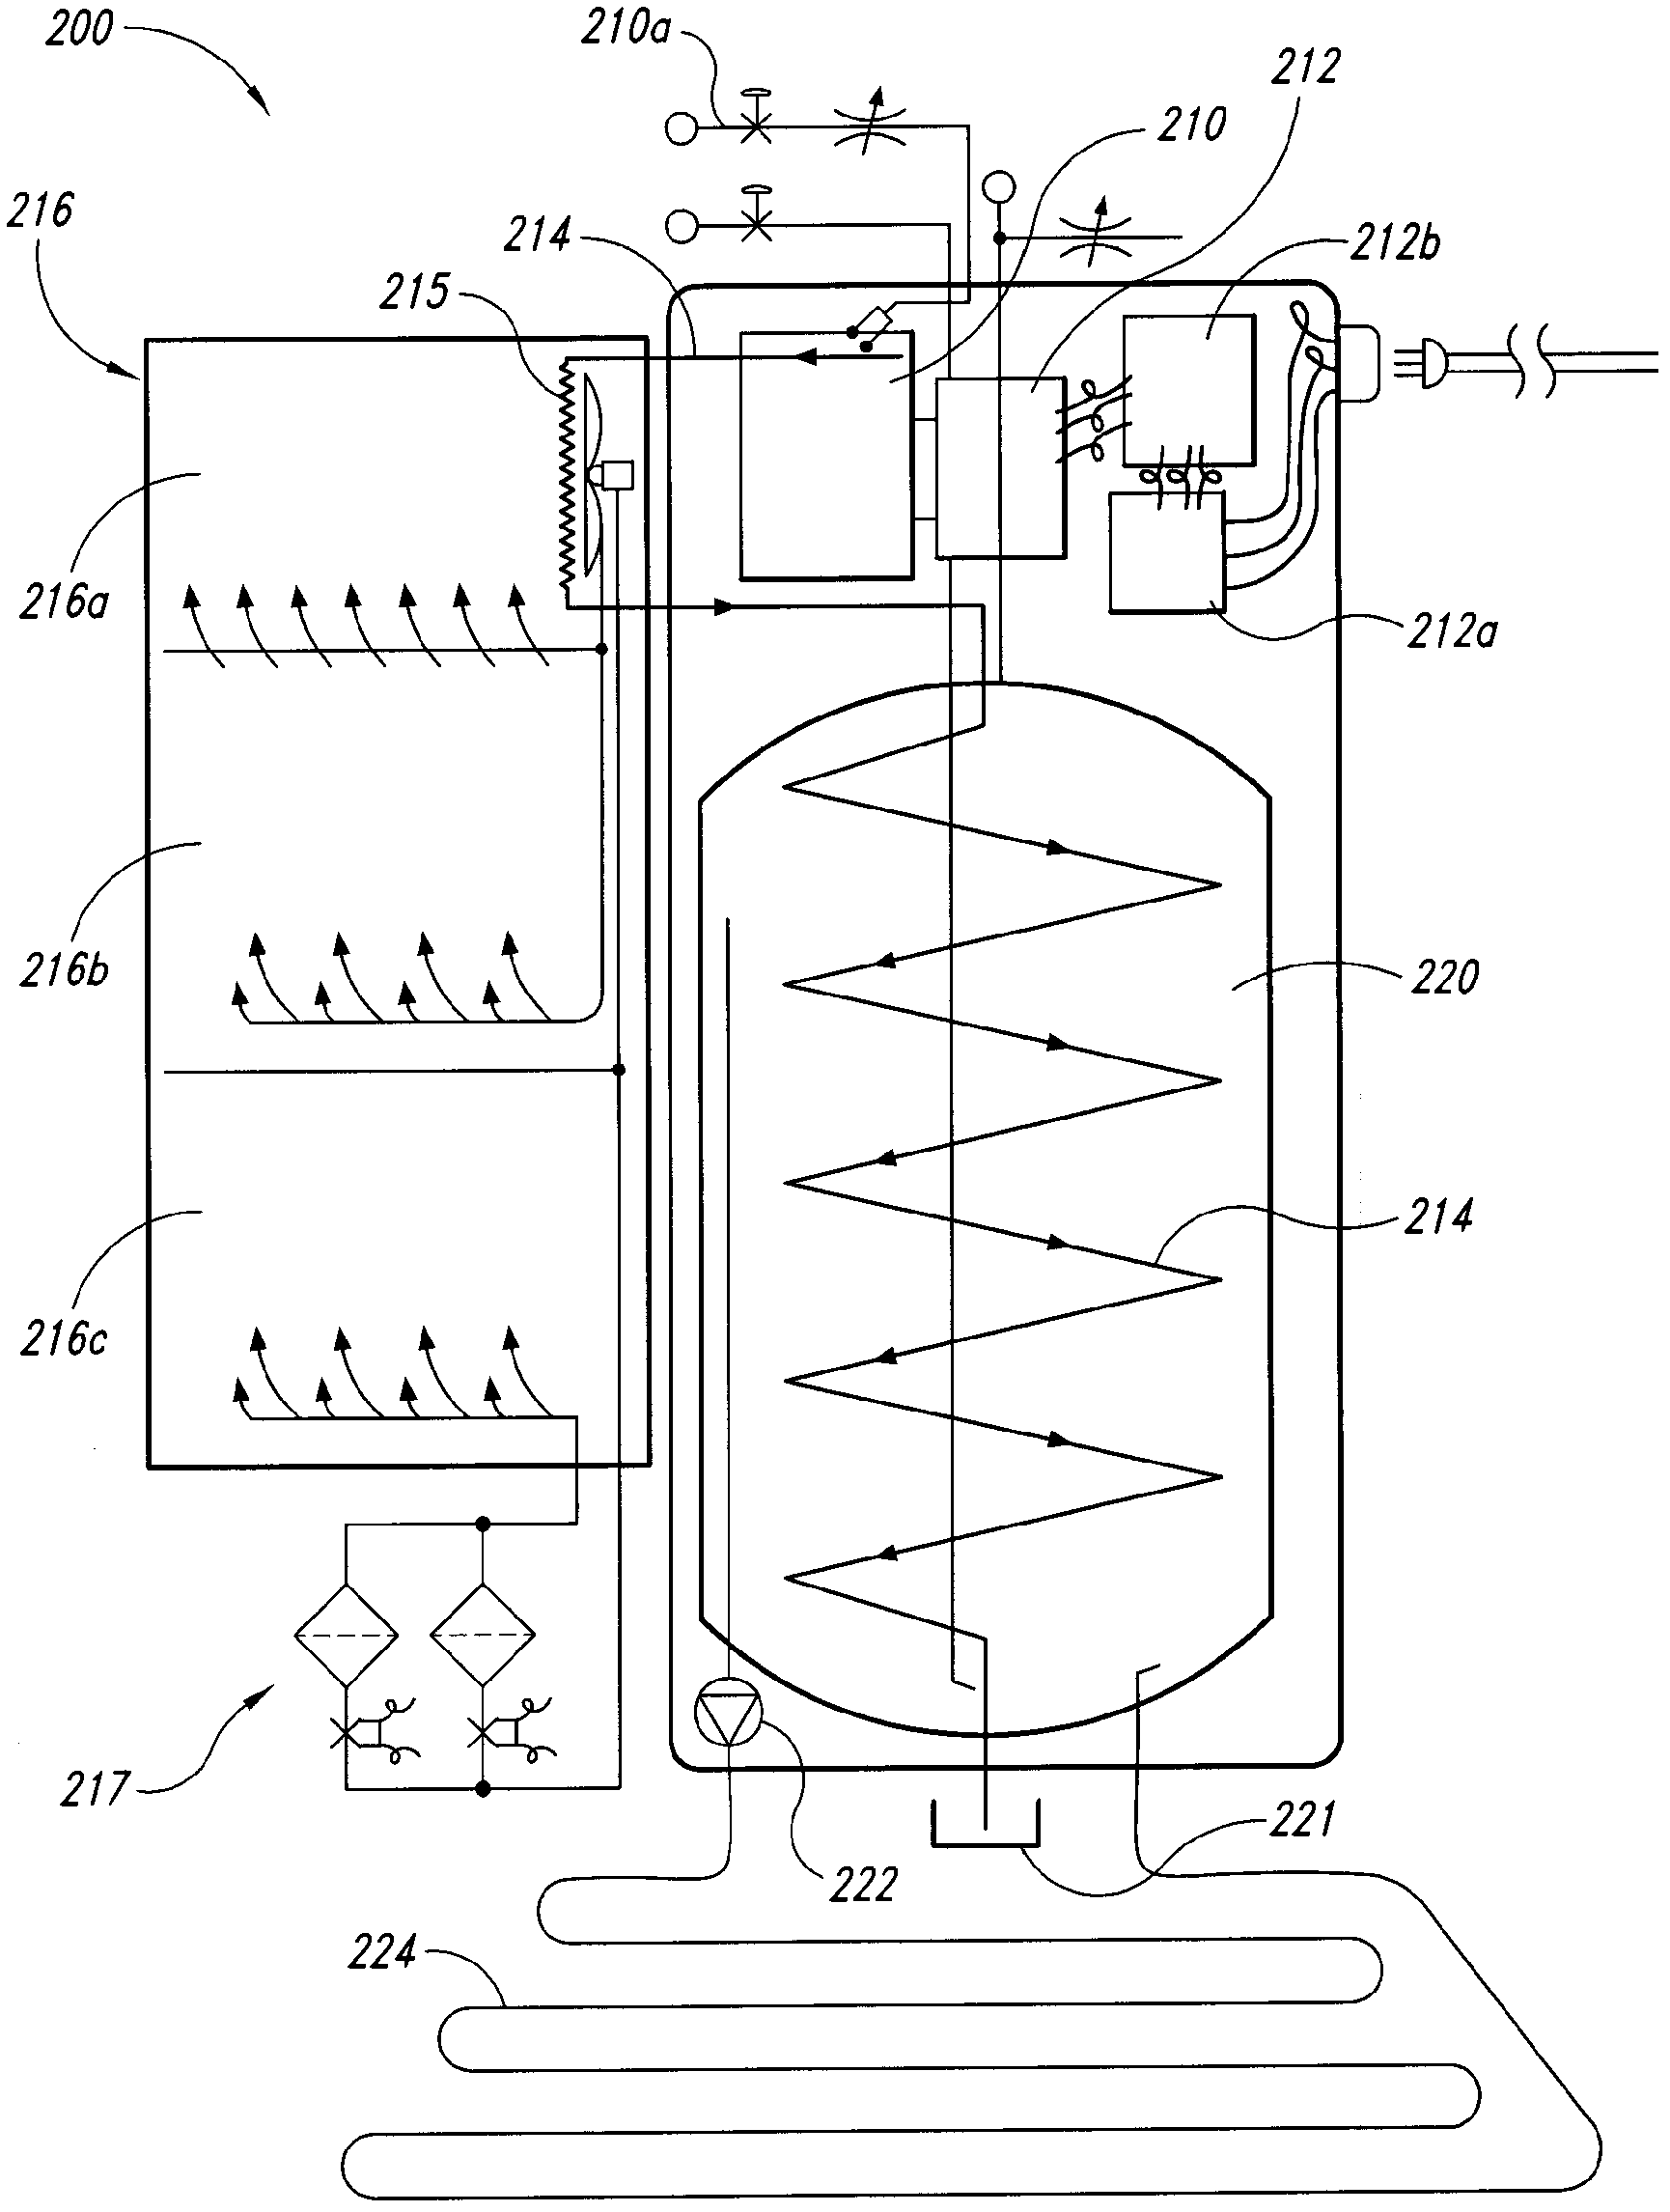 Energy system for dwelling support